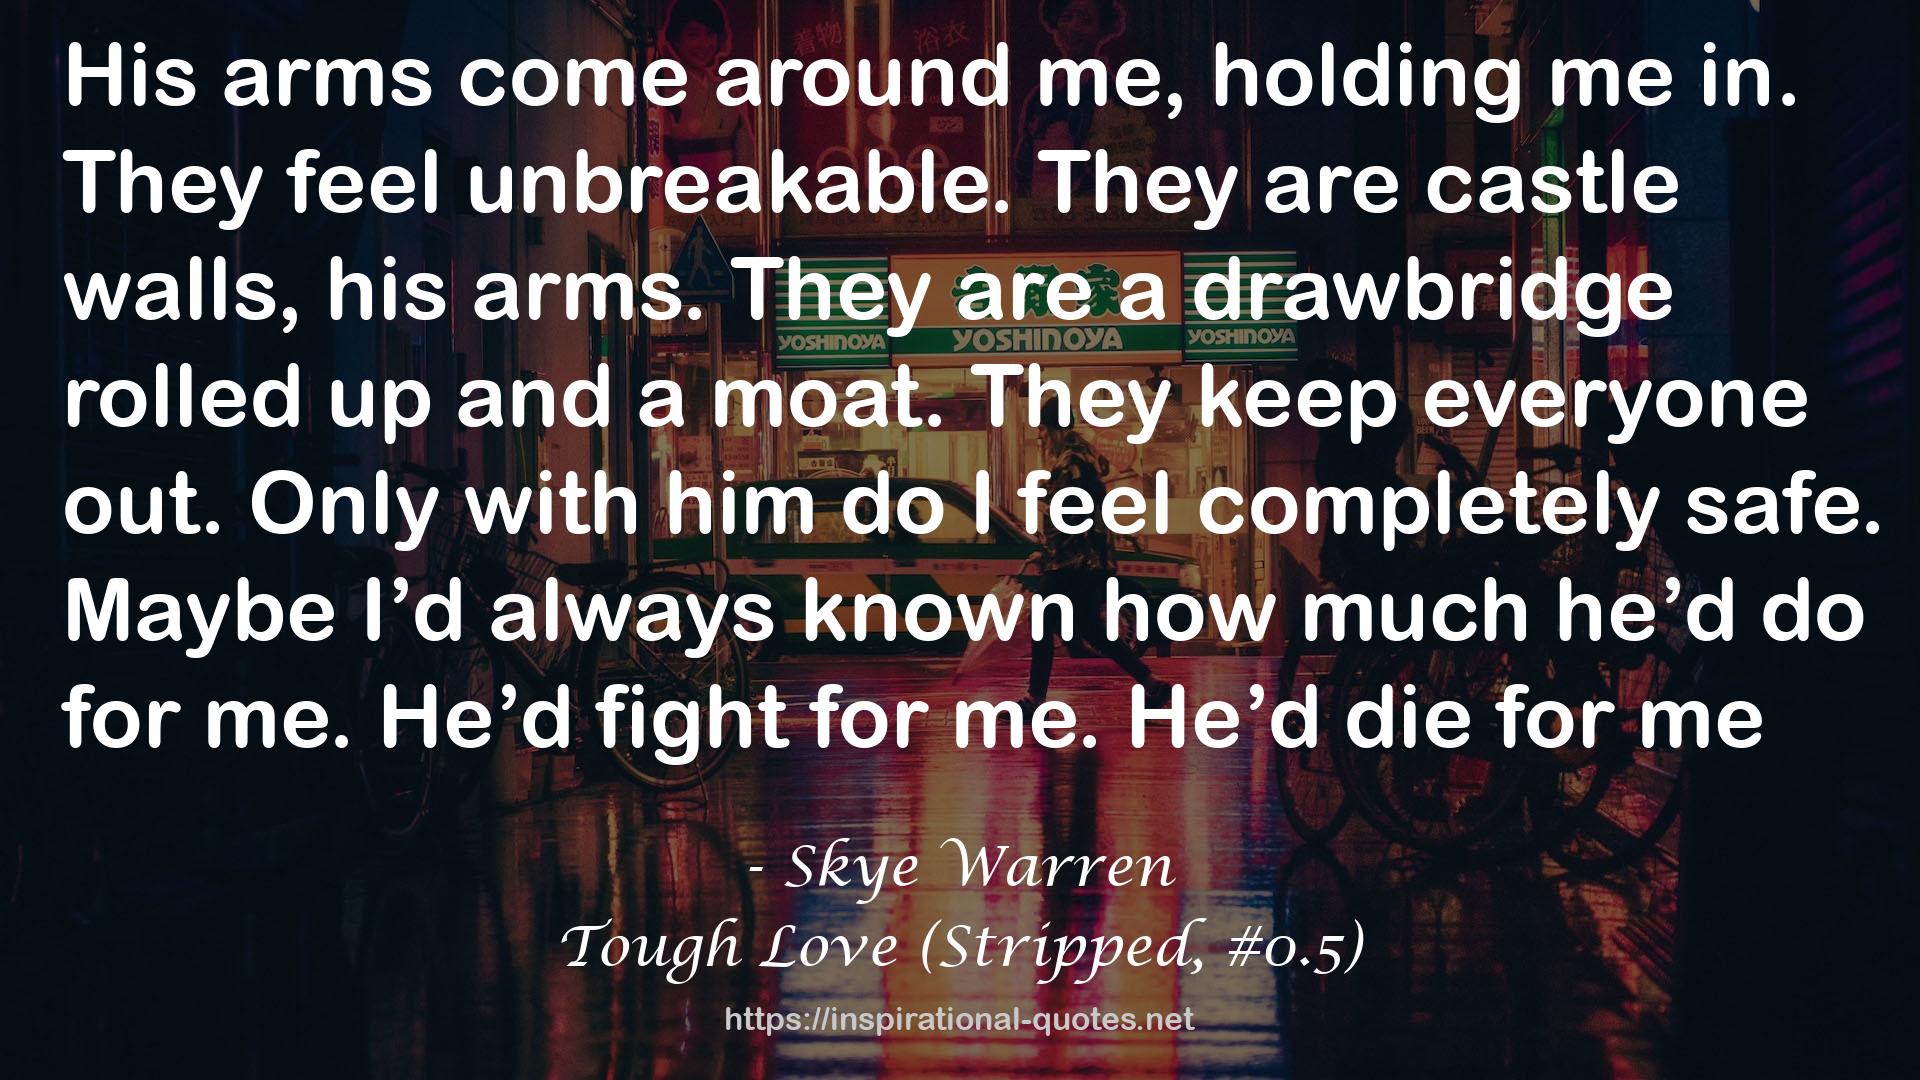 Tough Love (Stripped, #0.5) QUOTES